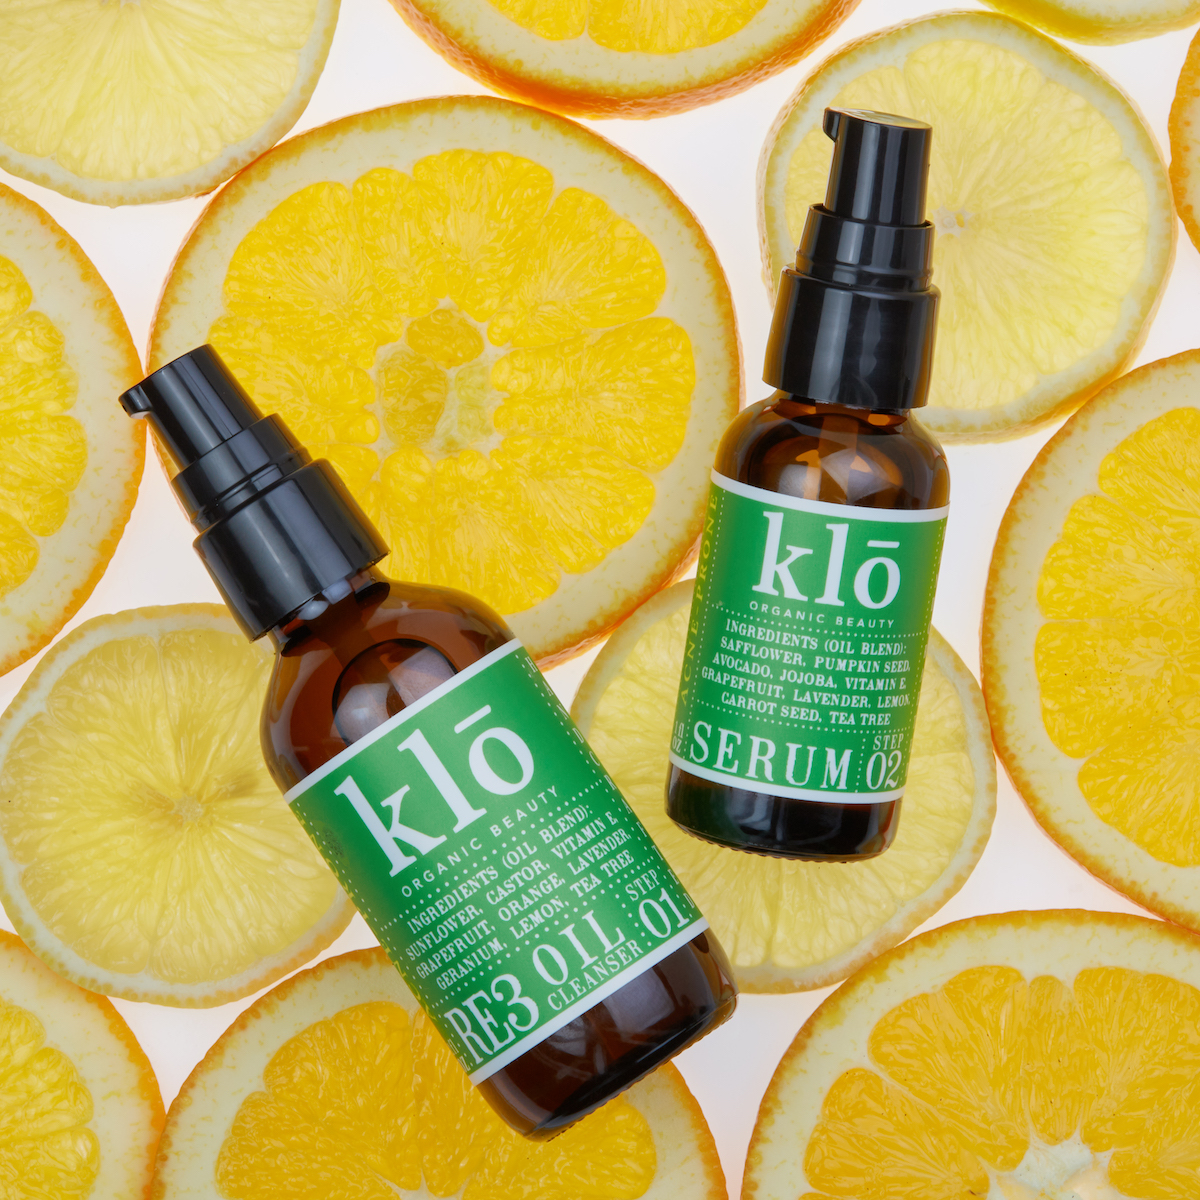 Klo duo for acne-prone skin with round sliced lemons and oranges.